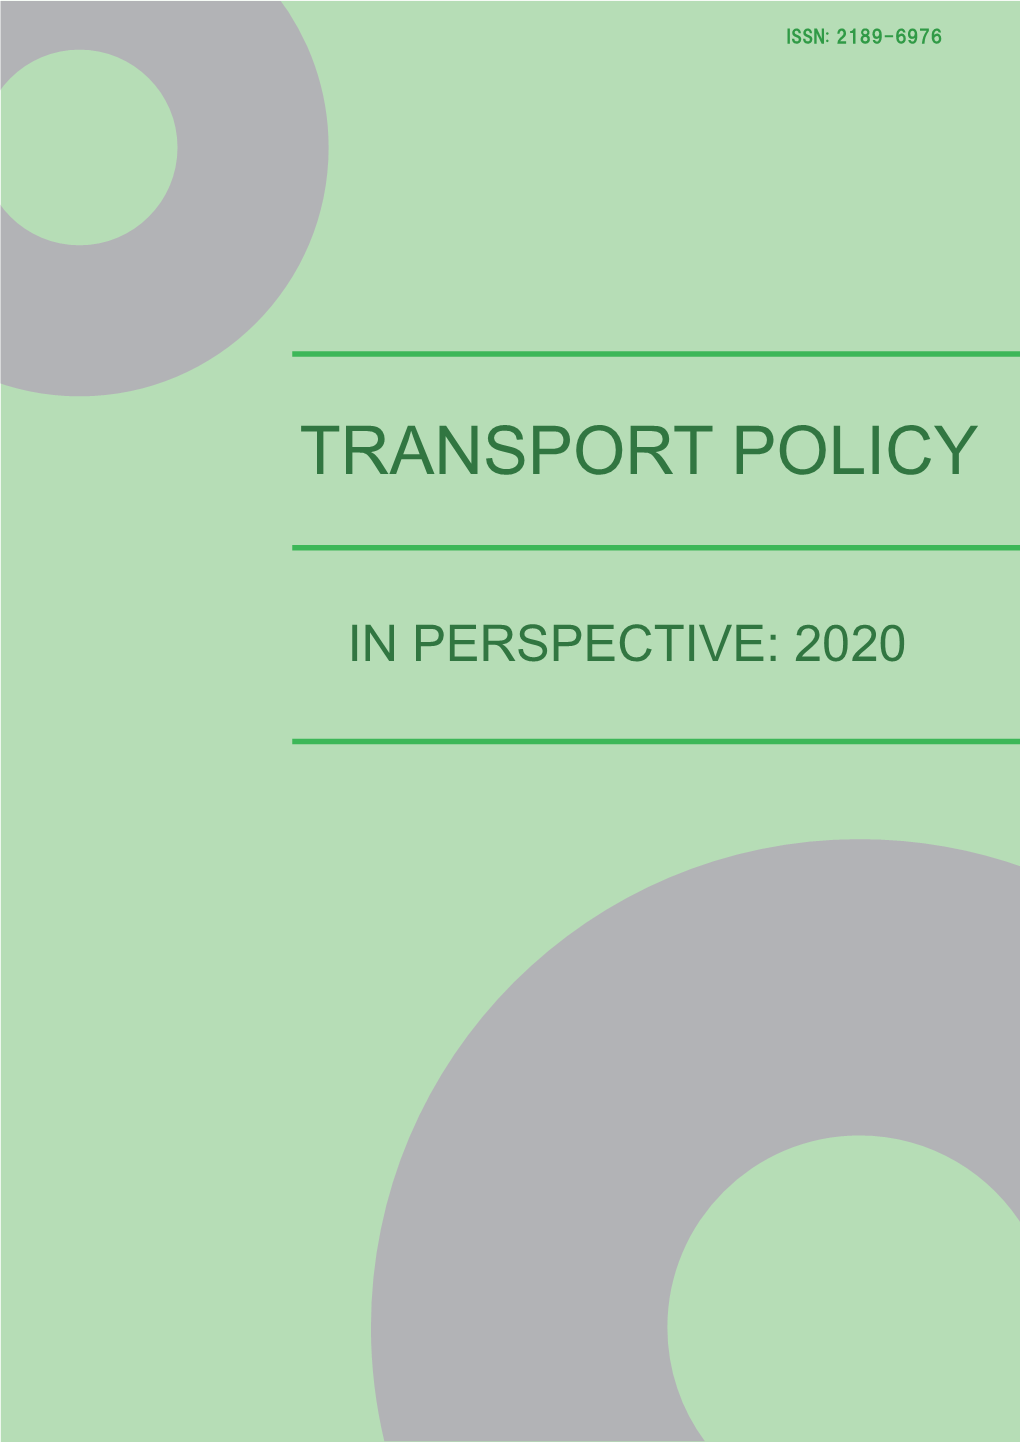 Transport Policy in Perspective: 2020